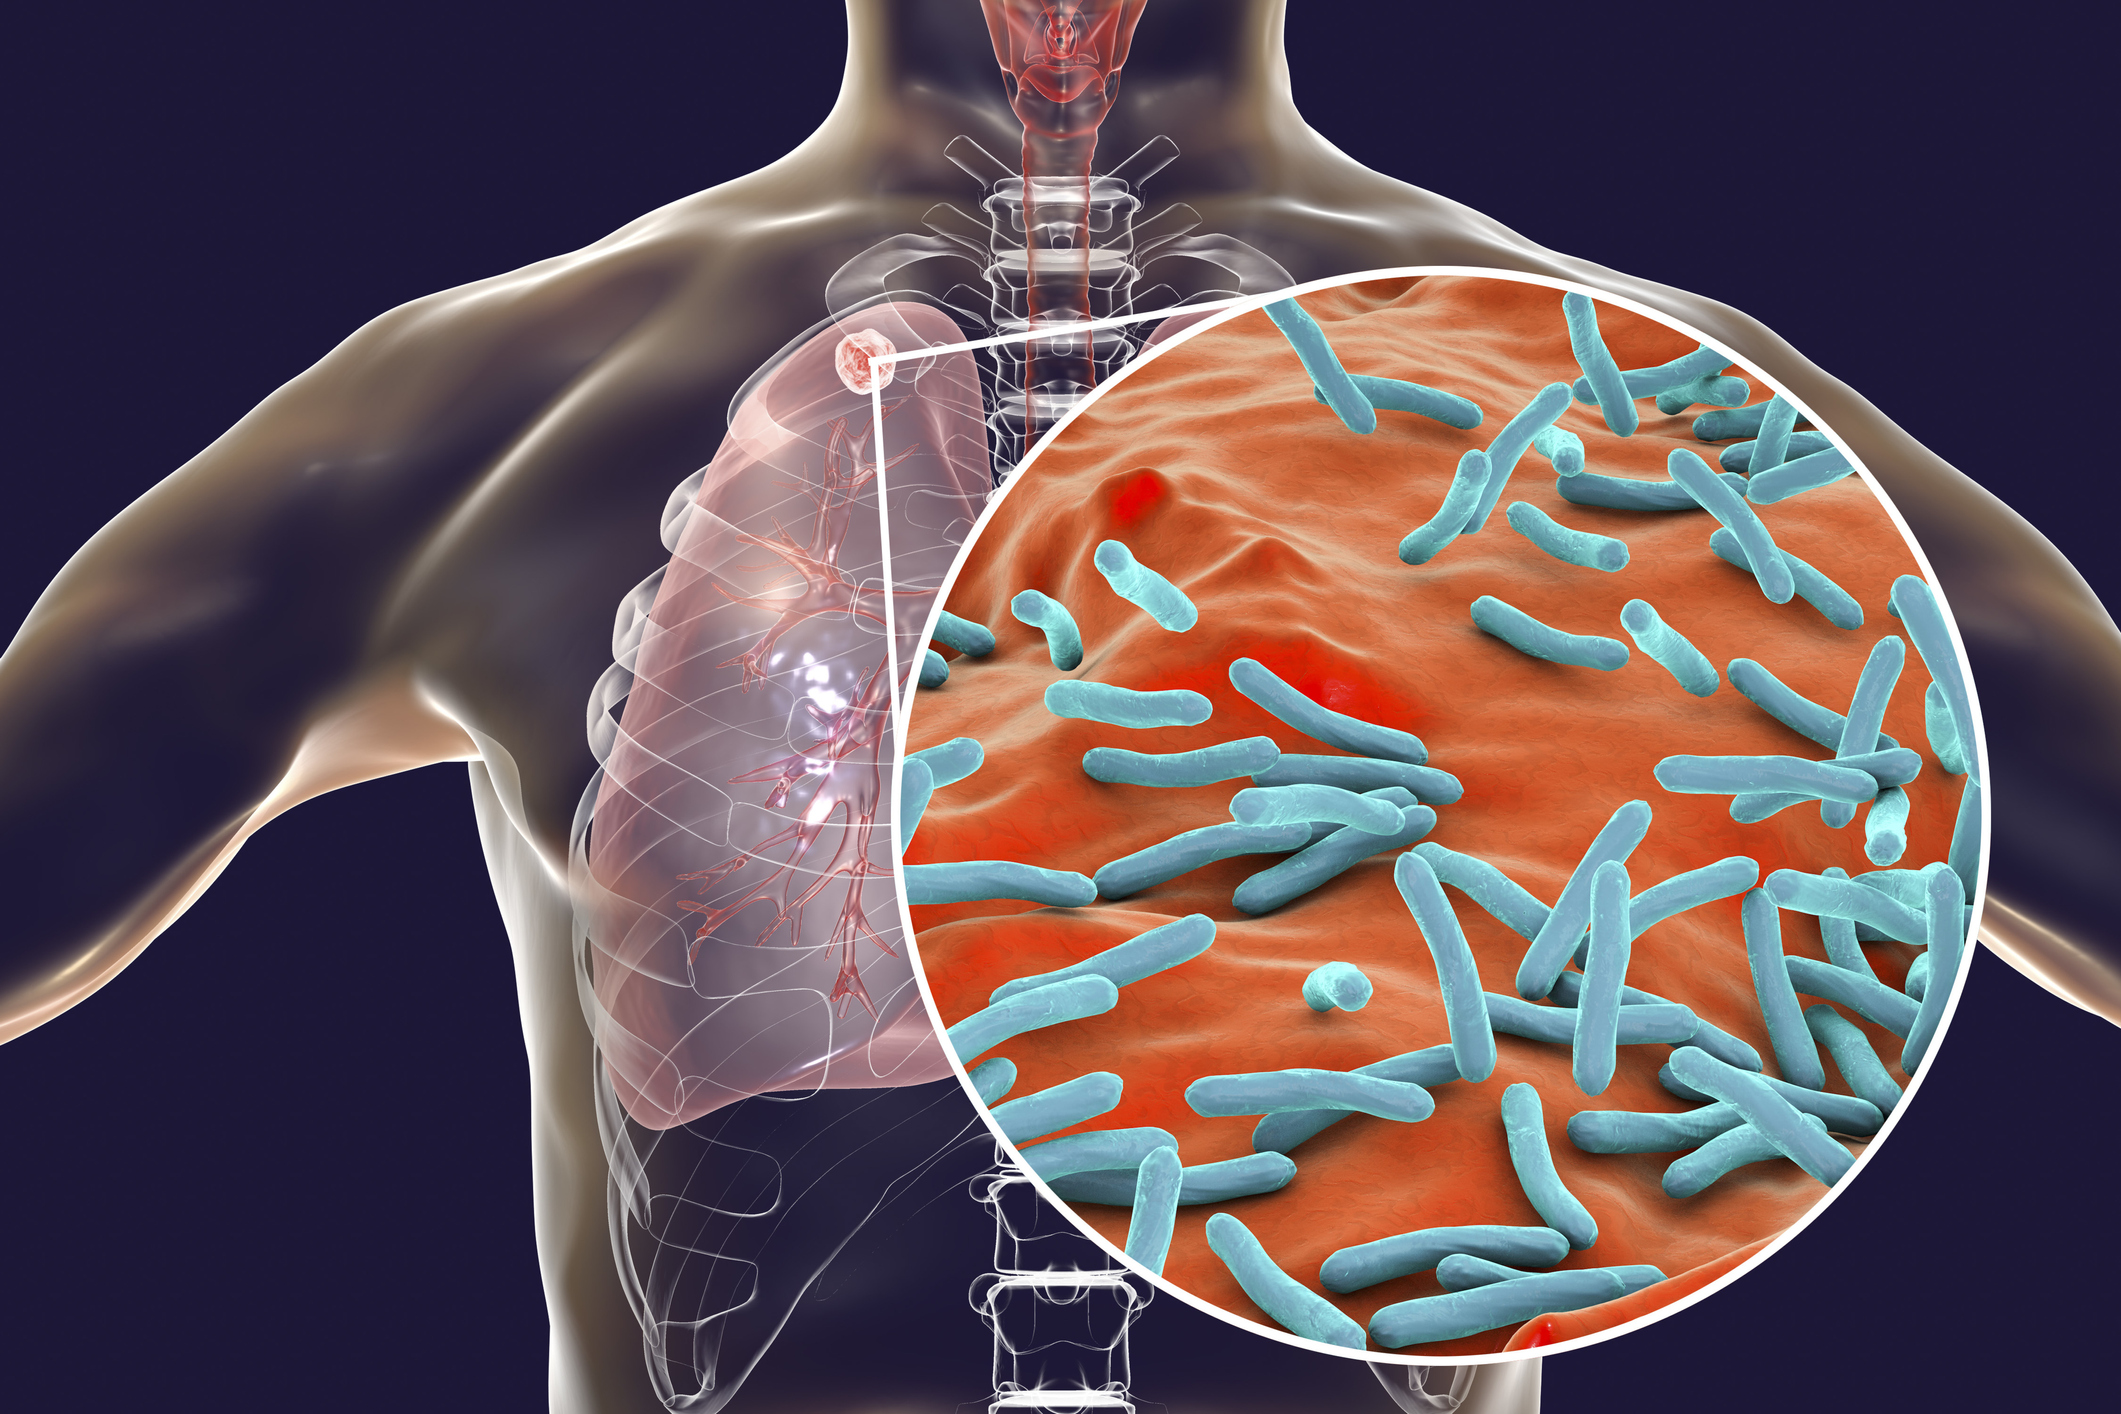 Genetic Targets for New Tuberculosis Lung Treatments Identified